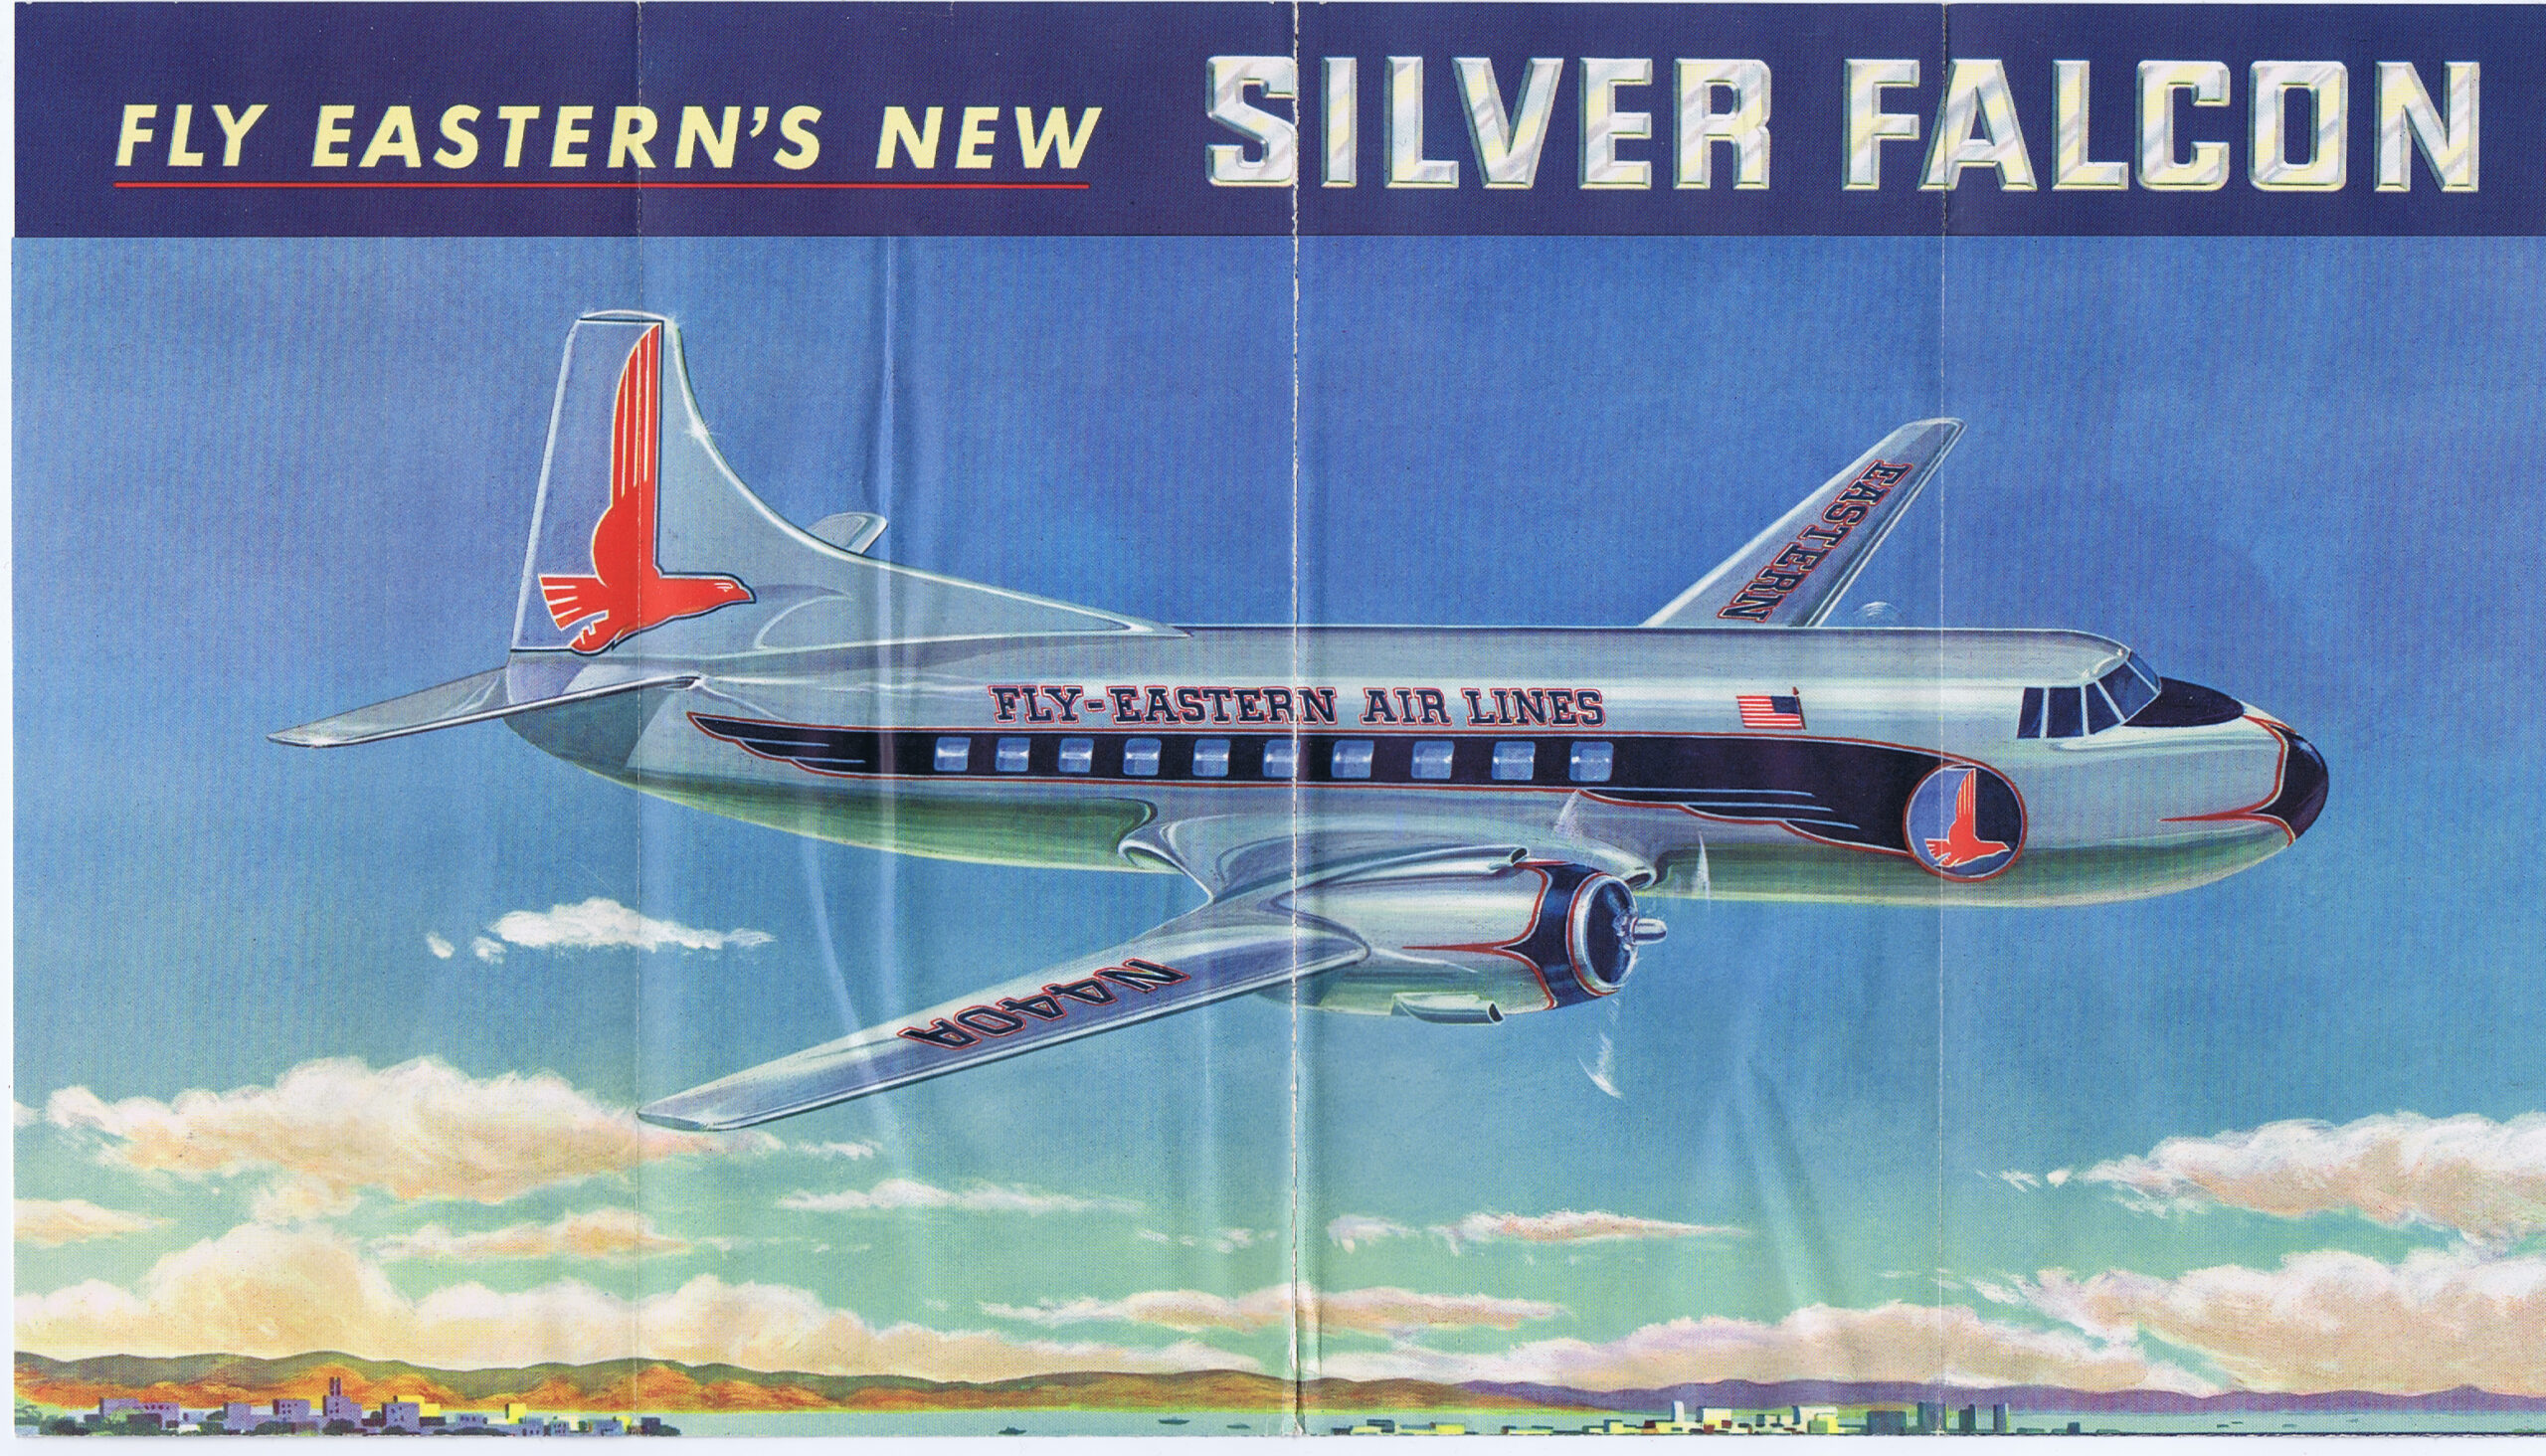 M77	EASTERN’S SILVER FALCON - WORLD’S MOST ADVANCED TWIN-ENGINE AIRLINER